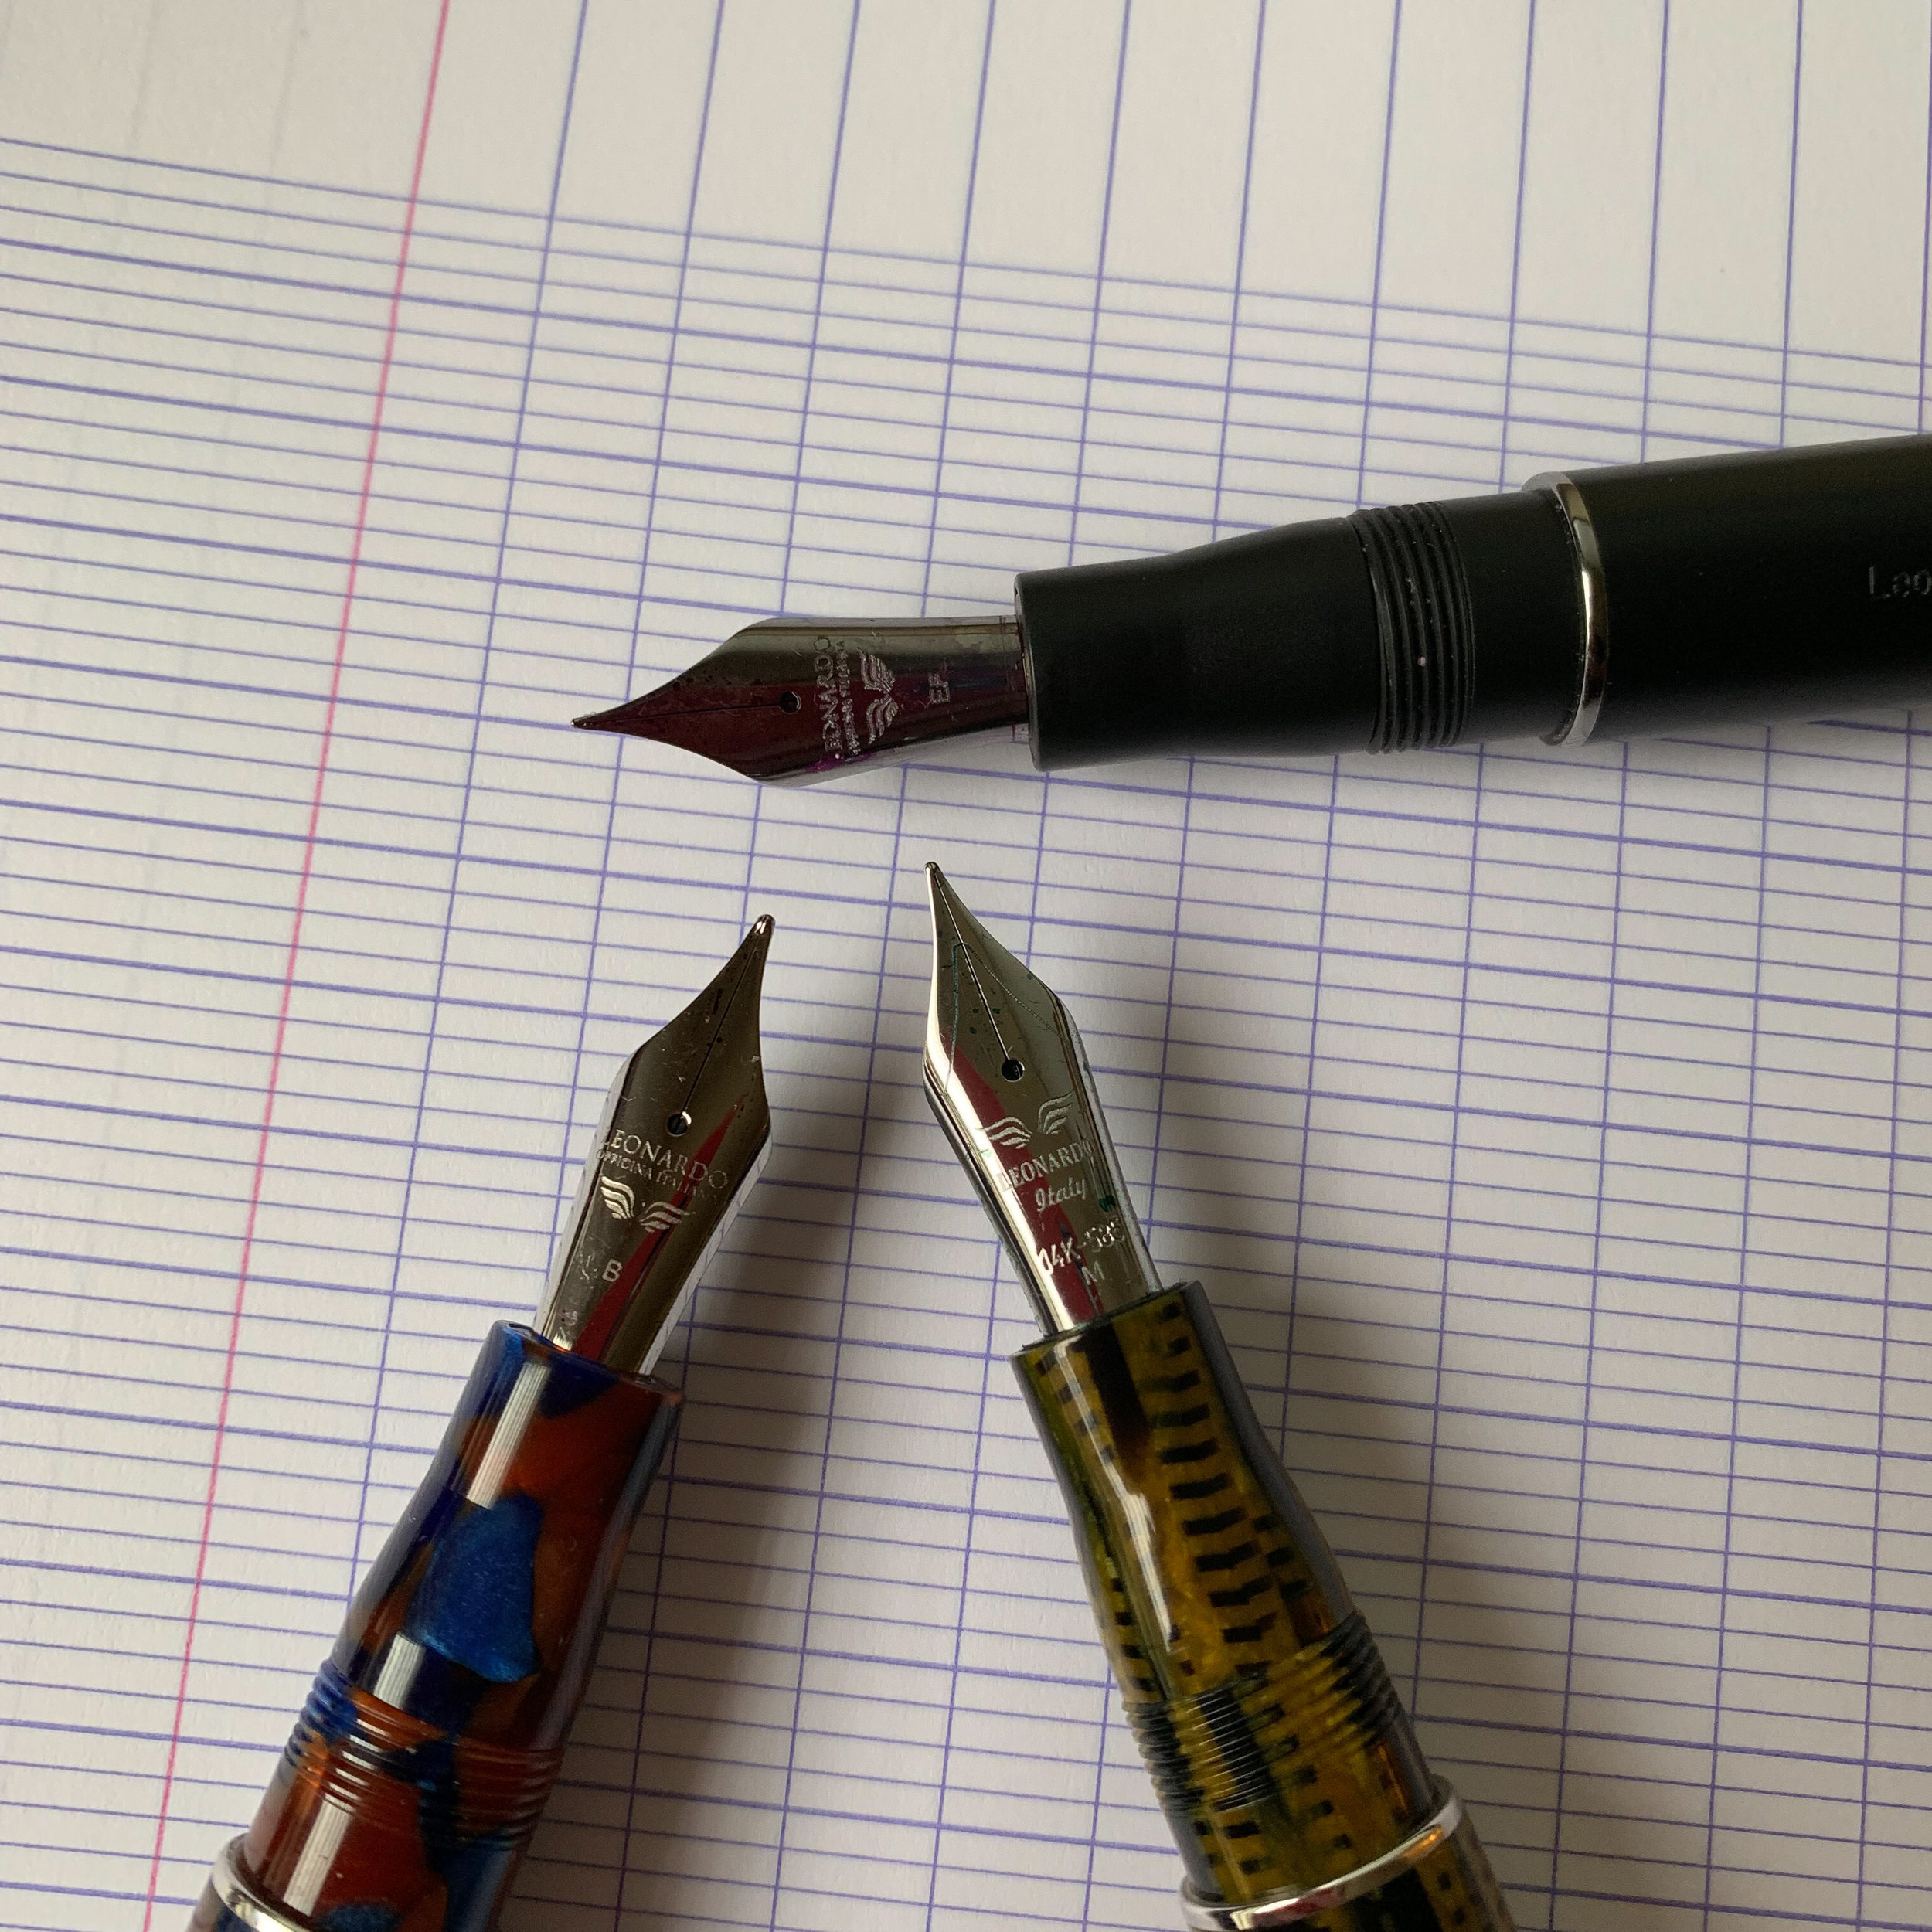 How To Use Your Fountain Pens More Often: Write In Journals